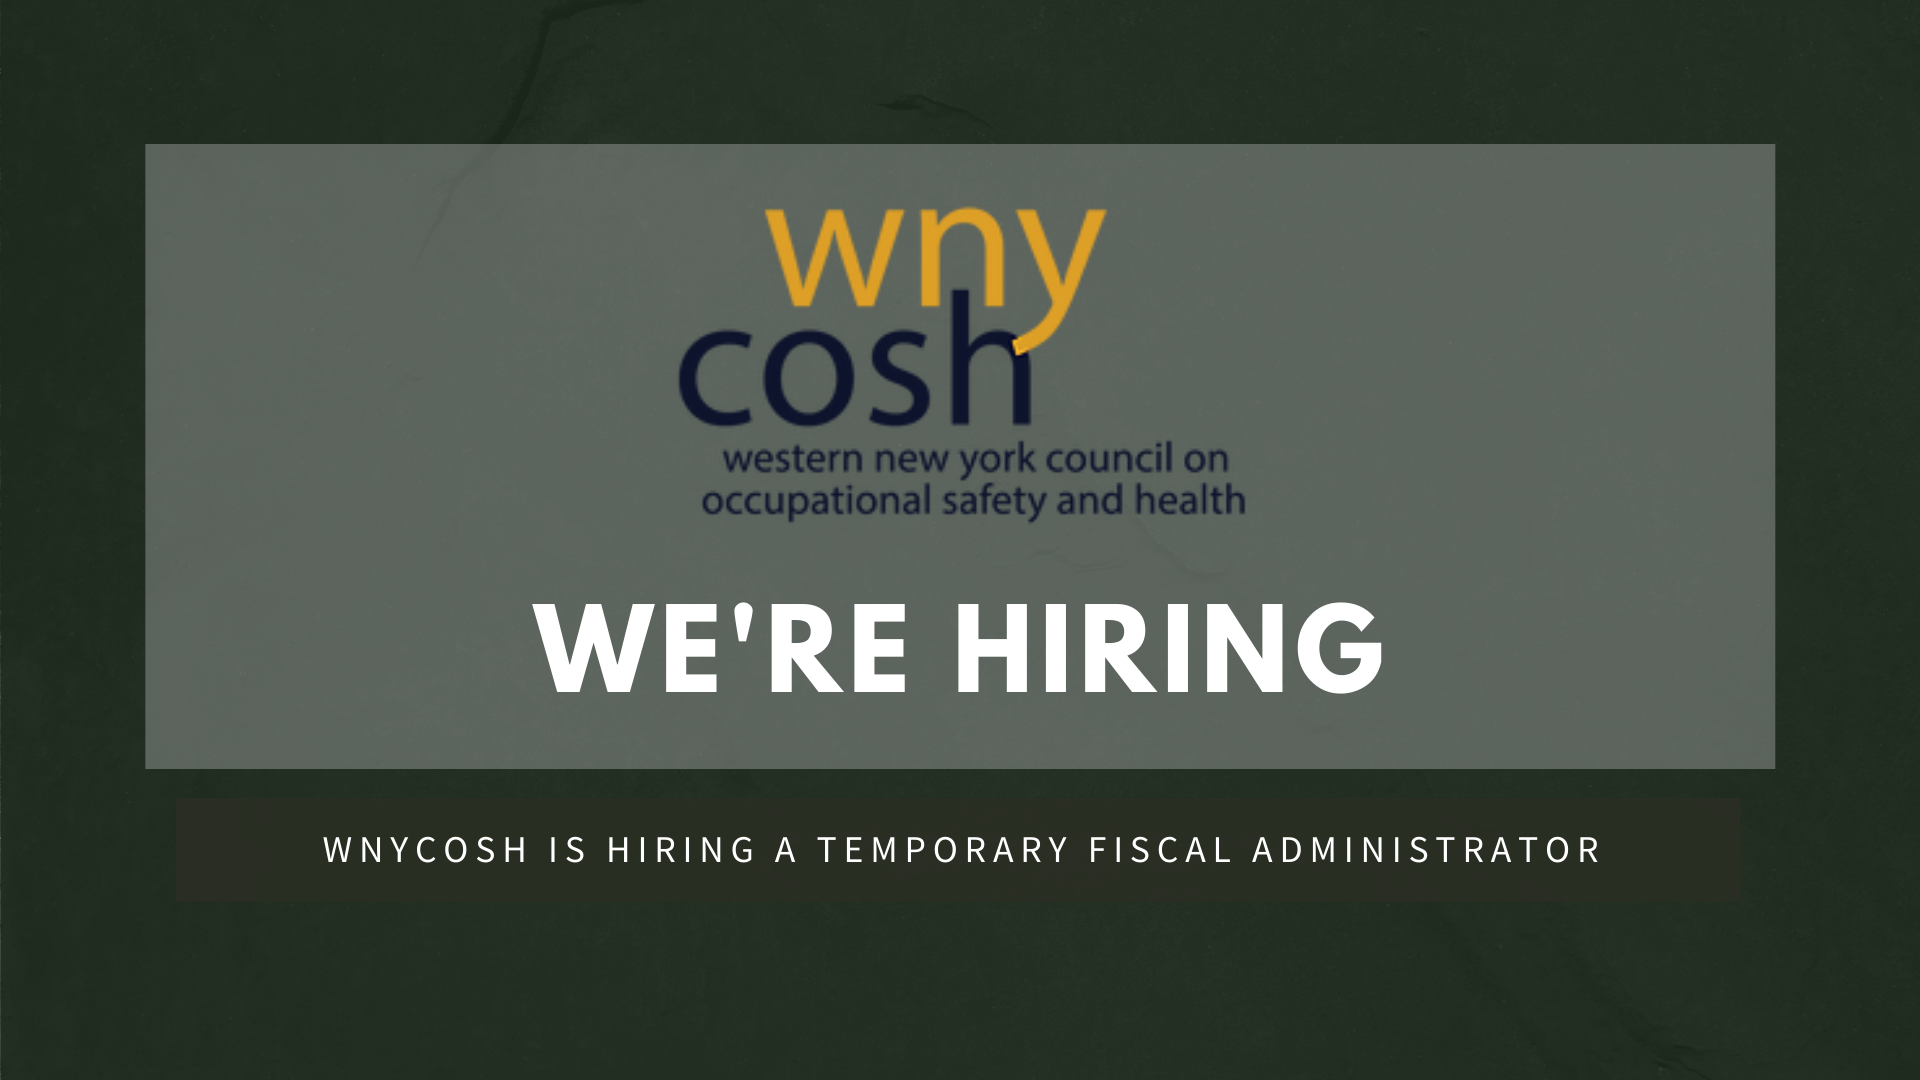 Image with the WNYCOSH logo saying "We're Hiring." Subheader says: WNYCOSH is hiring a Temporary Fiscal Administrator.